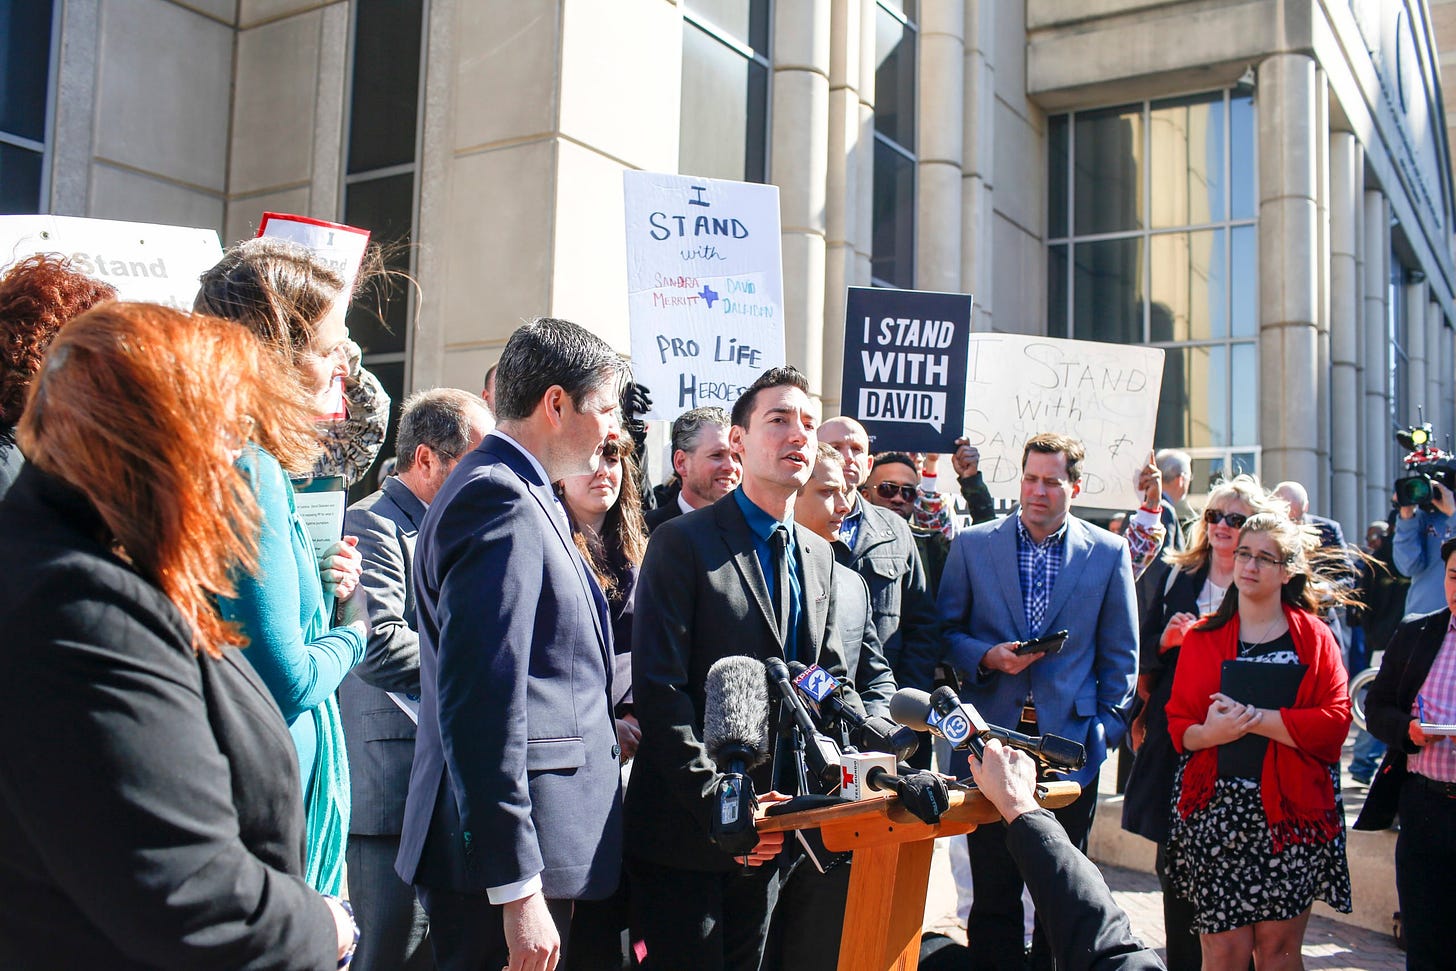 HOUSTON, TX - FEBRUARY 04: David Daleiden, a defendant in an indictment stemming from a Planned Parenthood video he helped produce, speaks to the media after appearing in court at the Harris County Courthouse on February 4, 2016 in Houston, Texas. (Photo by Eric Kayne/Getty Images)